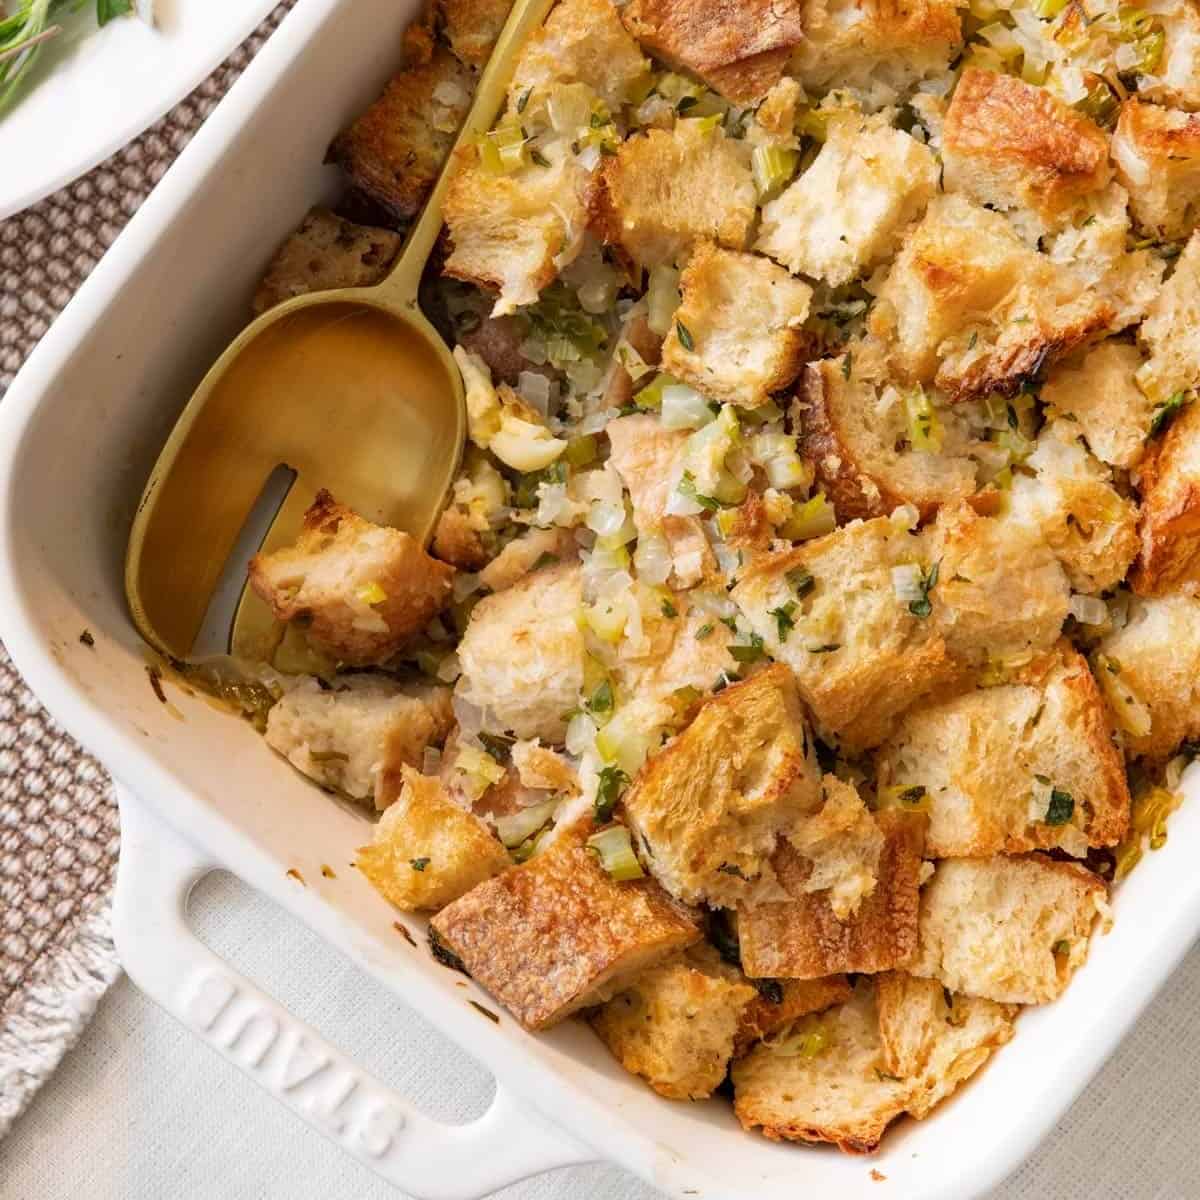 Thanksgiving Sourdough Stuffing {Outside of Turkey} - FeelGoodFoodie